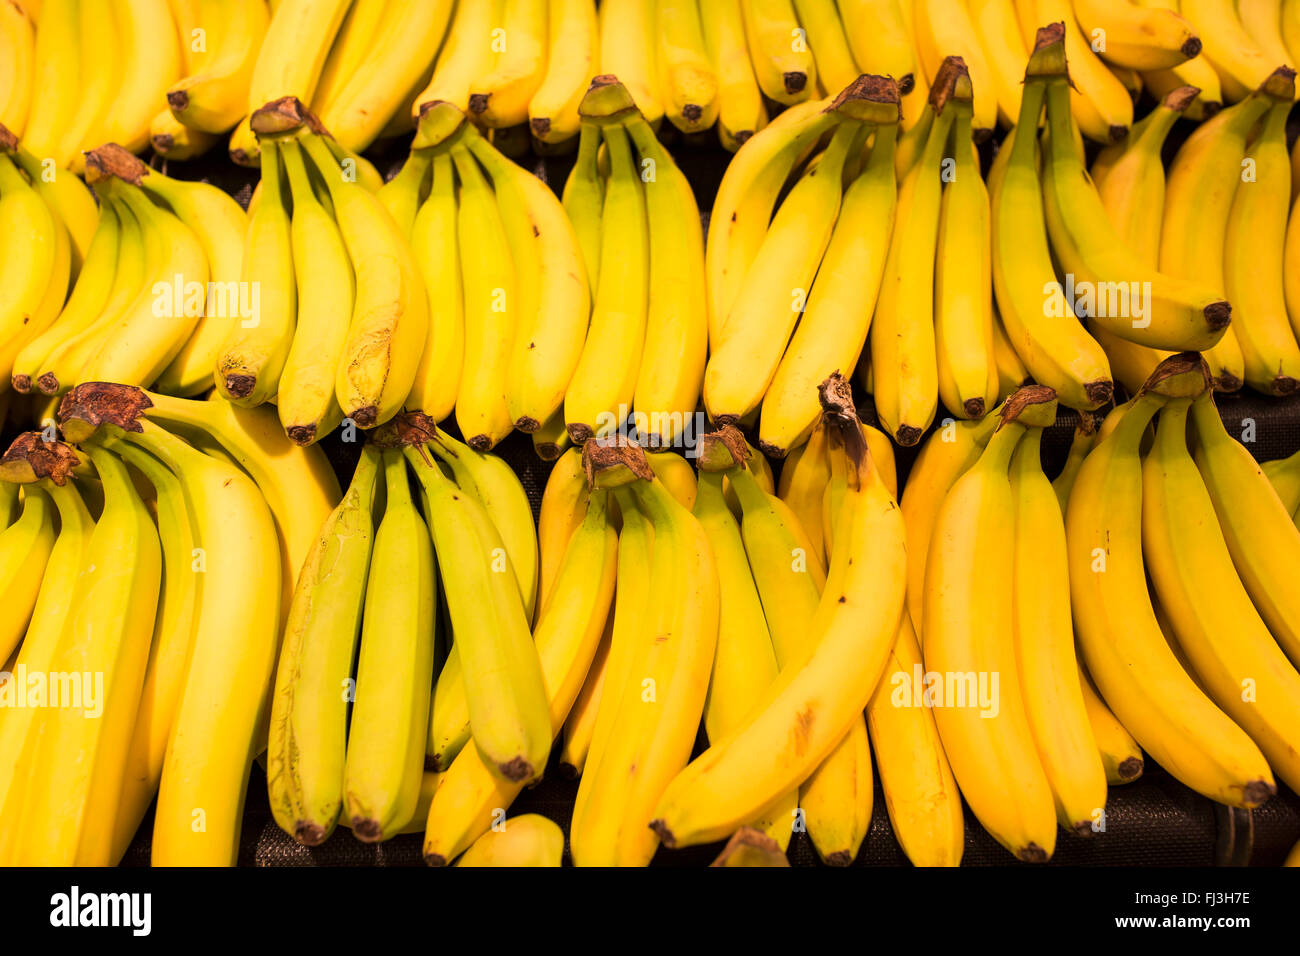 bananas on sale in a supermarket Stock Photo